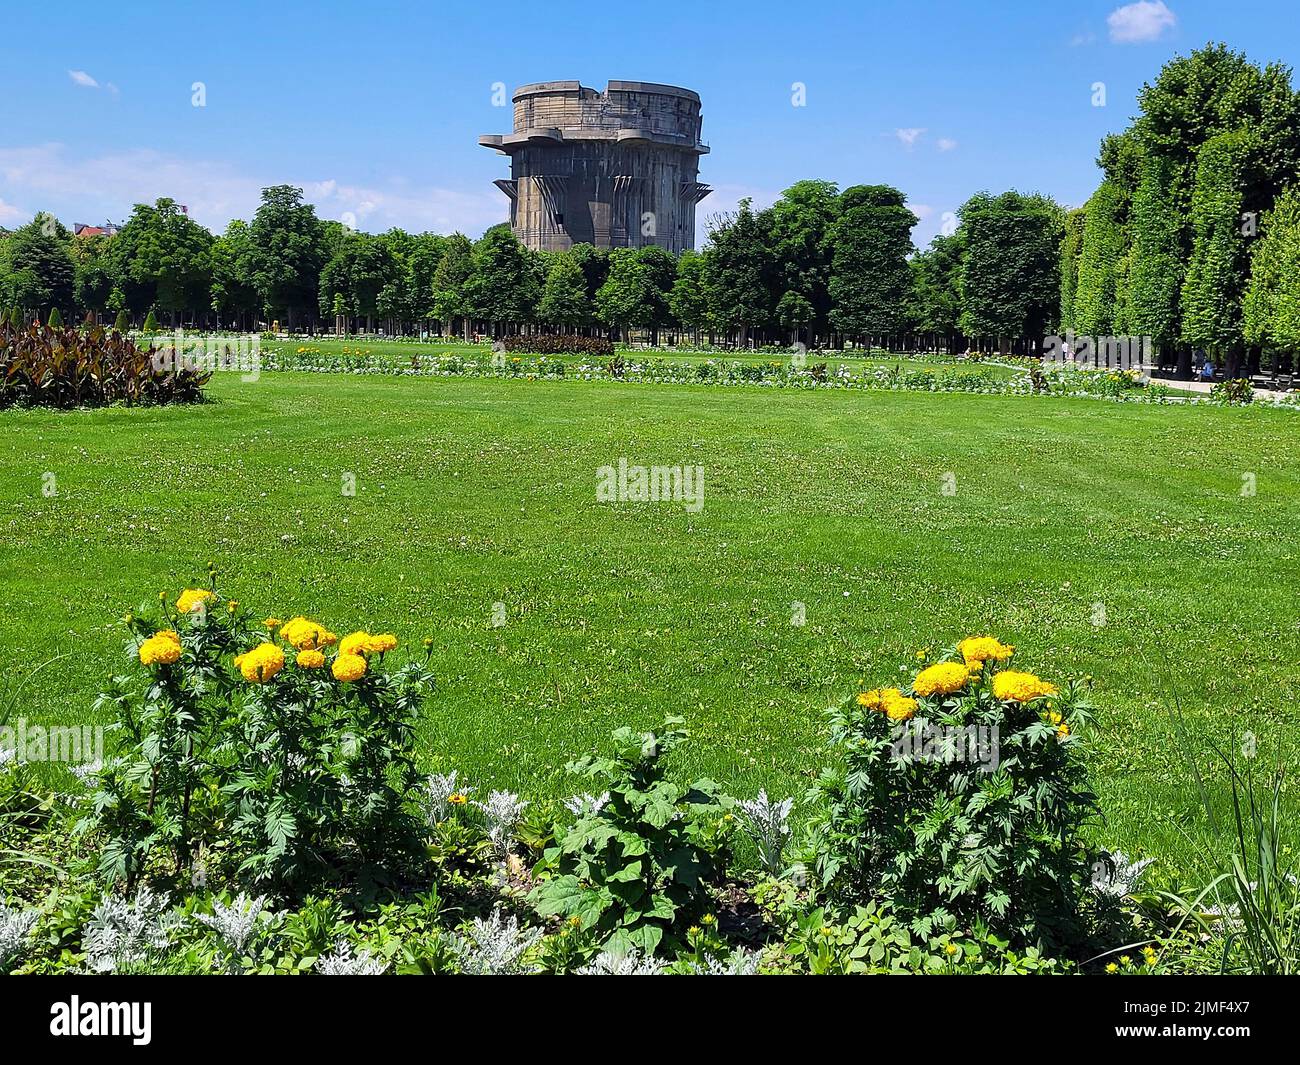 Austria, the public Augarten Park with one of the two flak towers from World War II, a green oasis in the 2nd district of Vienna, home of the Vienna B Stock Photo